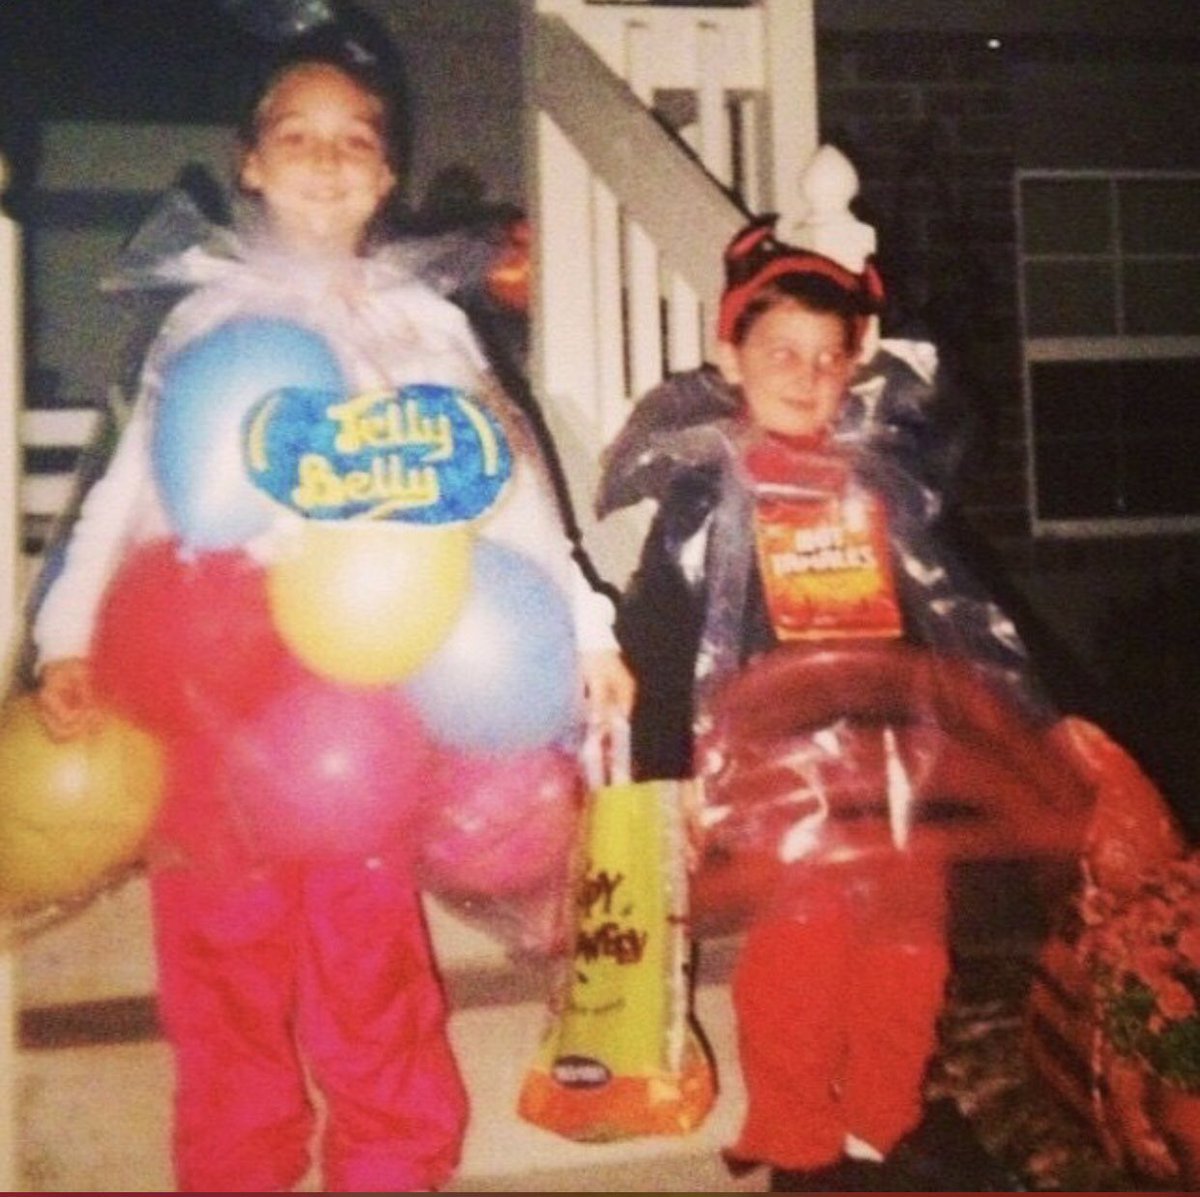 Post it every year...it never gets old...Happy Halloween. #JellyBelly #HotTamales #ICant #ThanksMom 😂